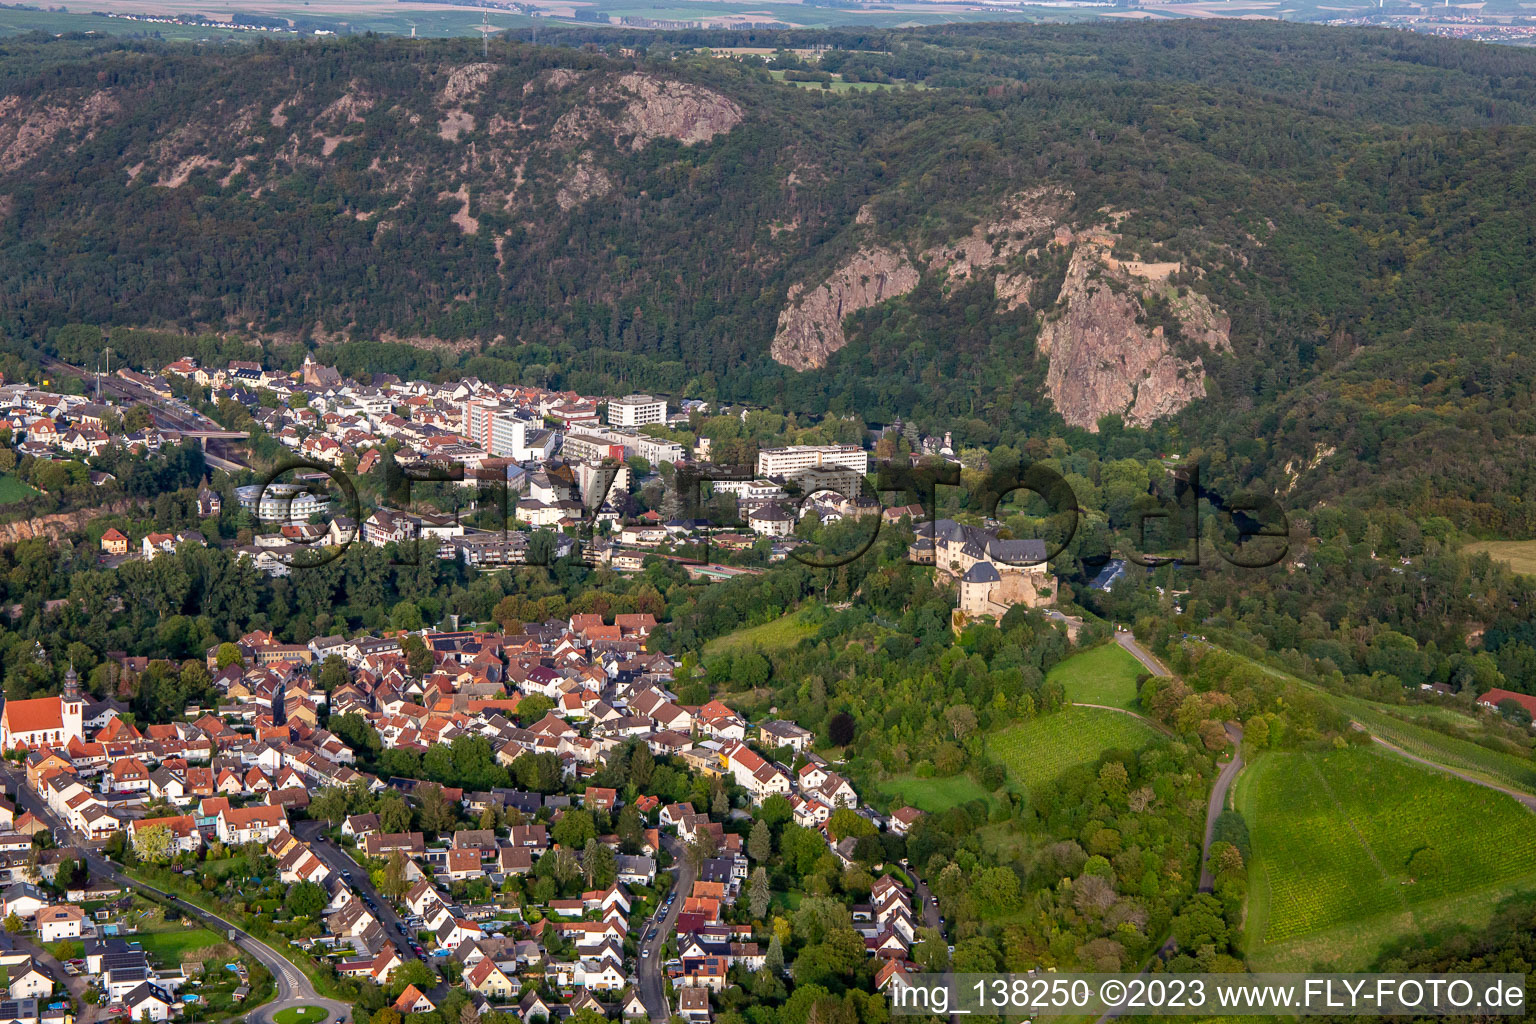 Aerial view of From the west in the district Ebernburg in Bad Kreuznach in the state Rhineland-Palatinate, Germany